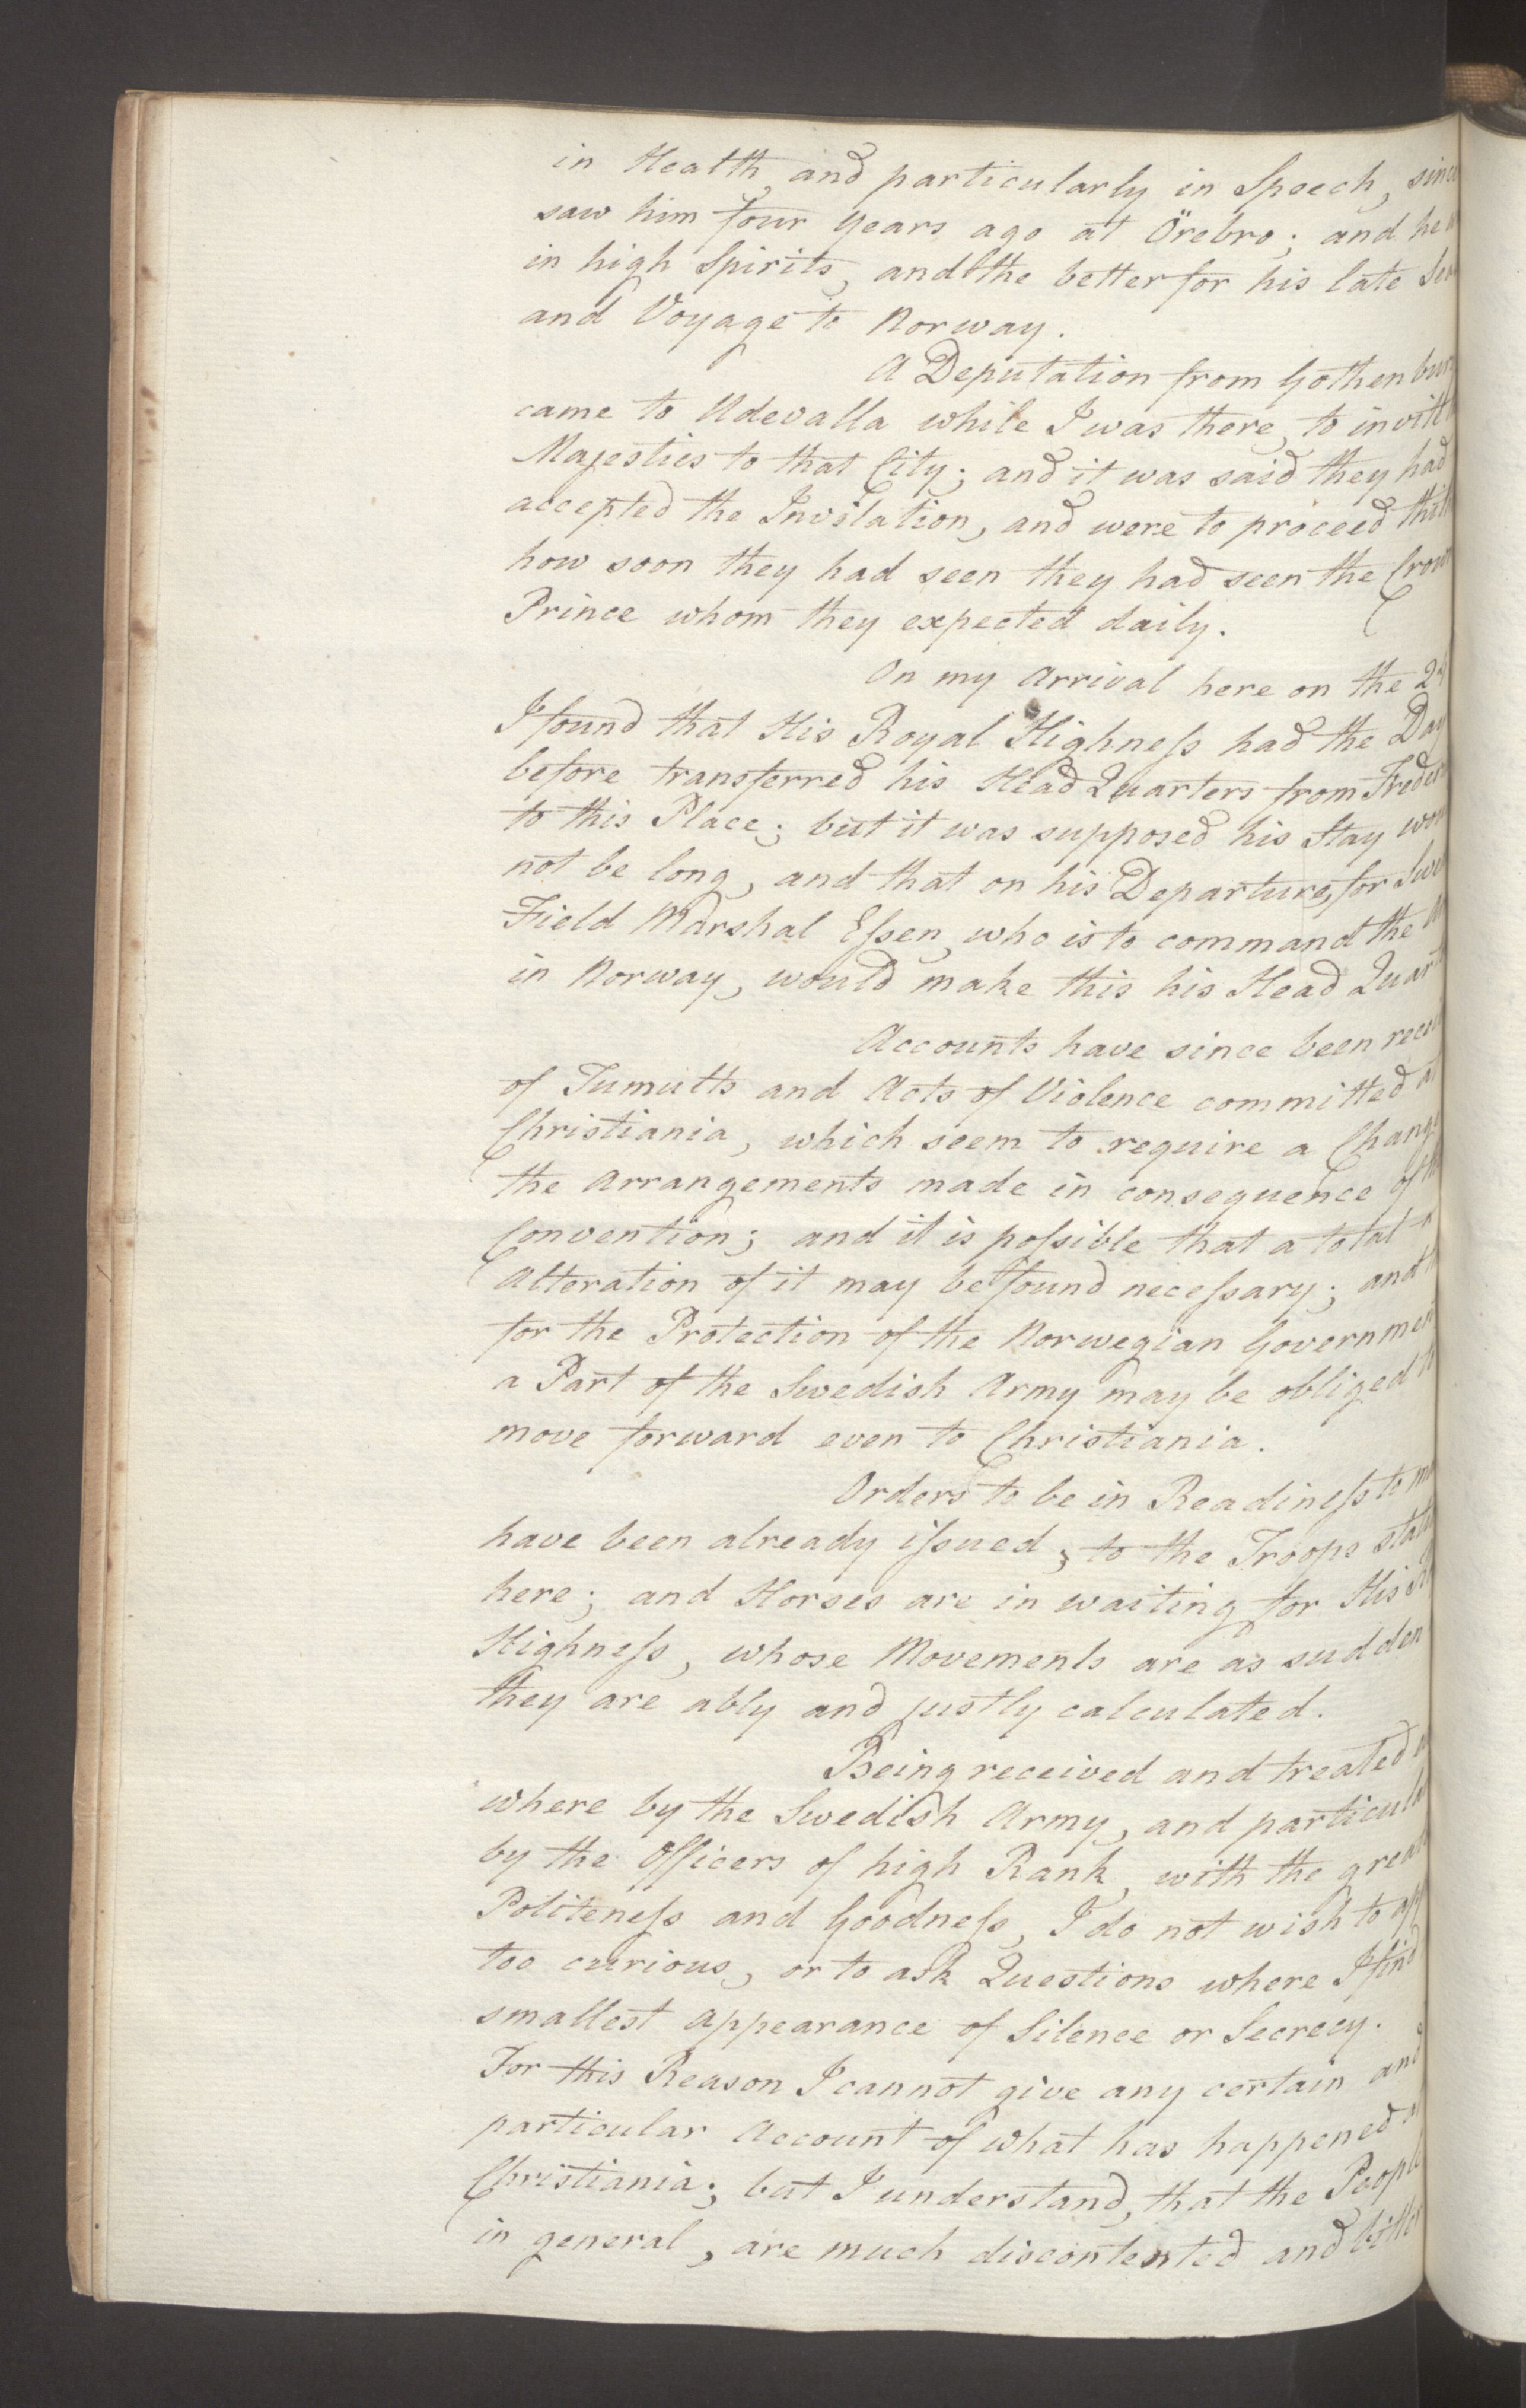 Foreign Office*, UKA/-/FO 38/16: Sir C. Gordon. Reports from Malmö, Jonkoping, and Helsingborg, 1814, p. 96